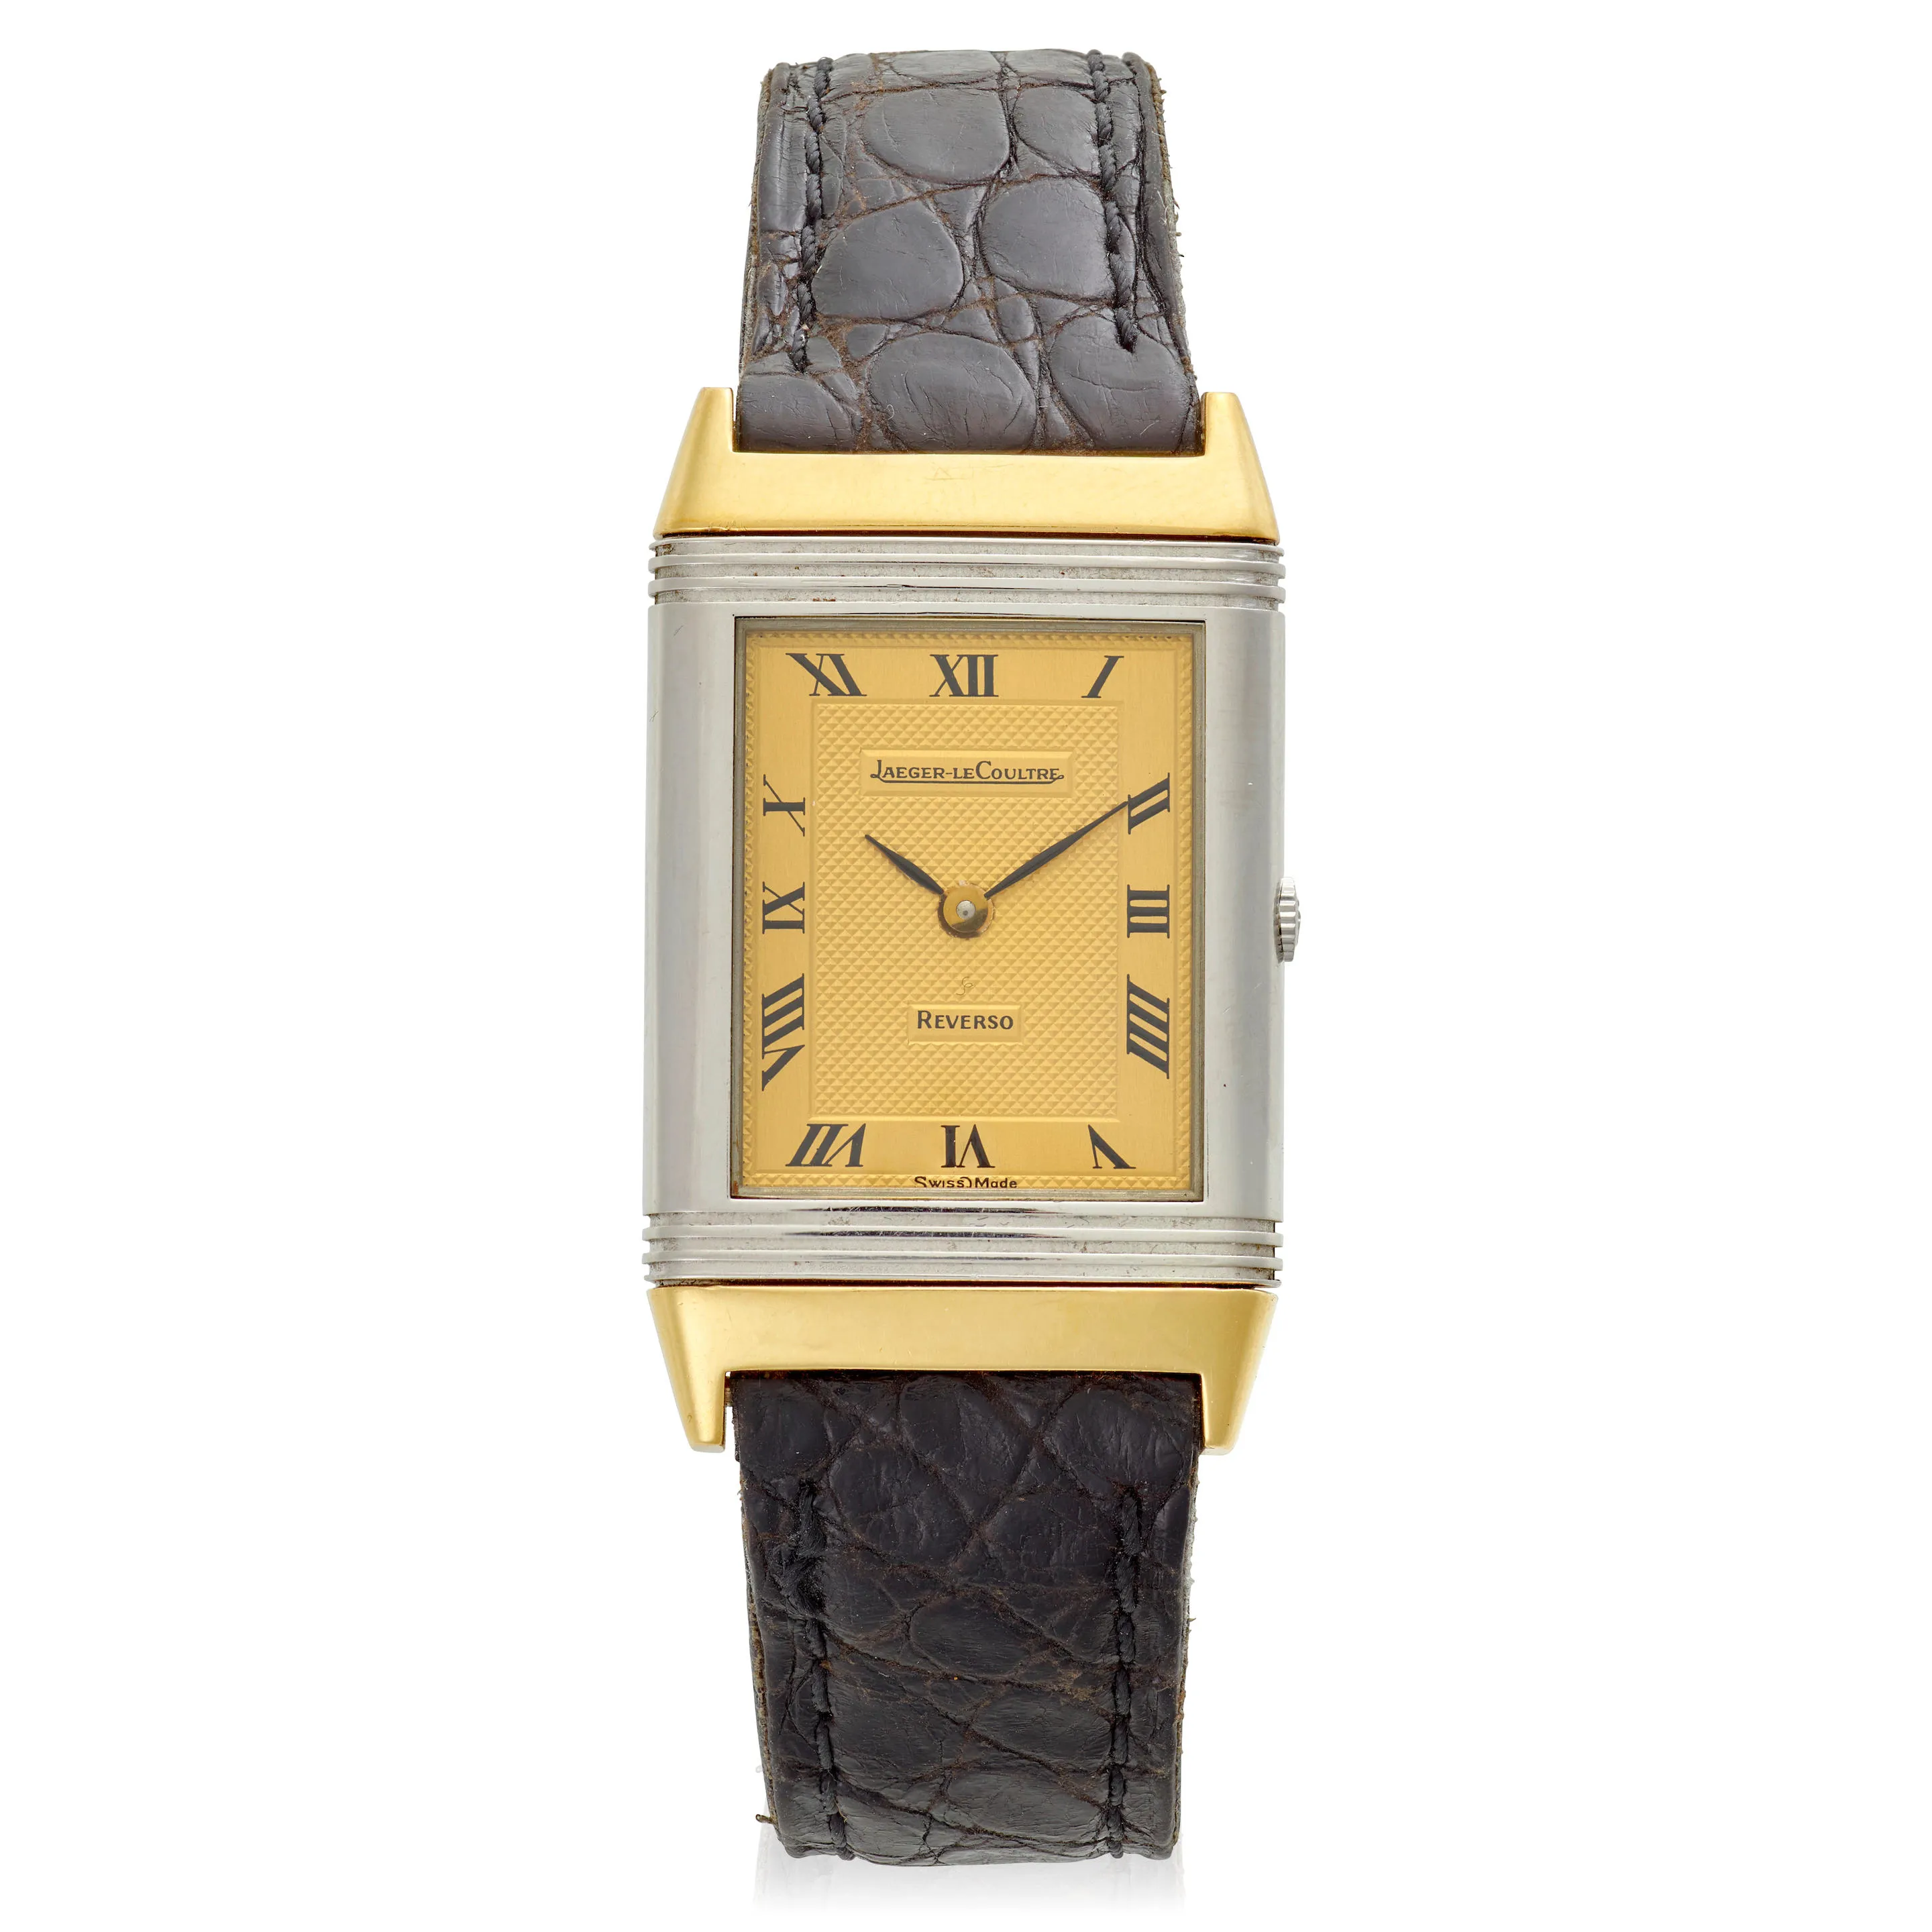 Jaeger-LeCoultre Reverso 140.251.5 33mm Yellow gold and stainless steel Champagne